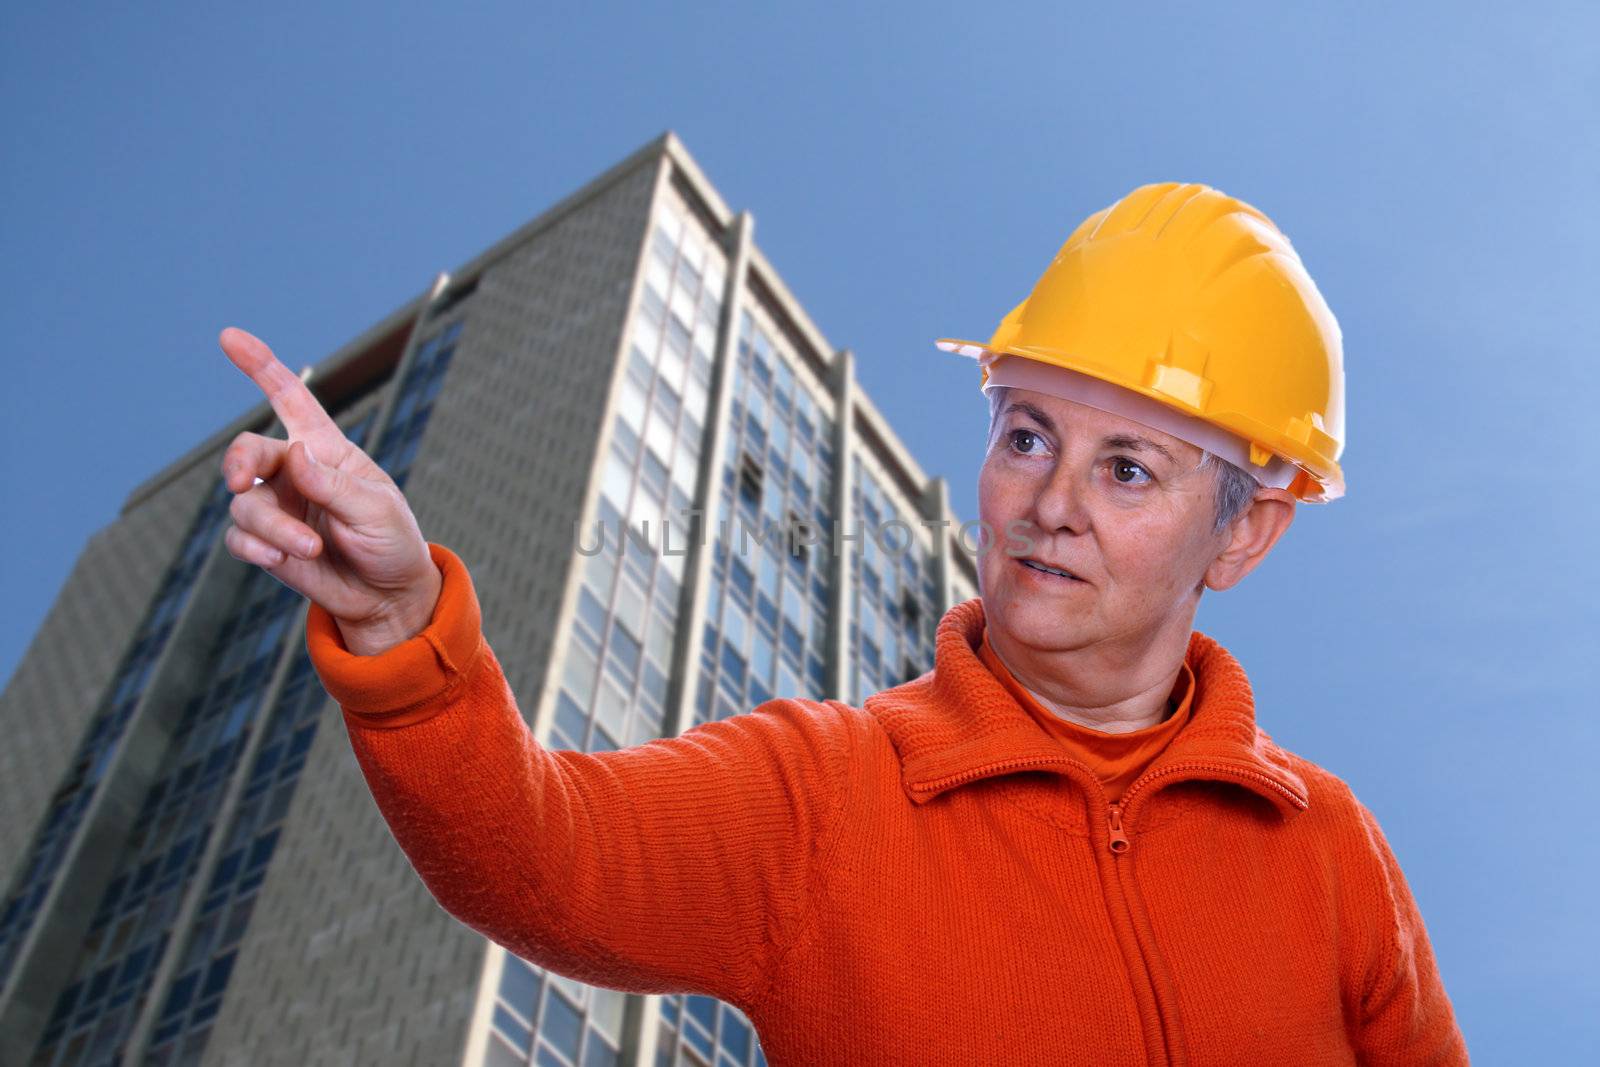 mature woman architect over white background